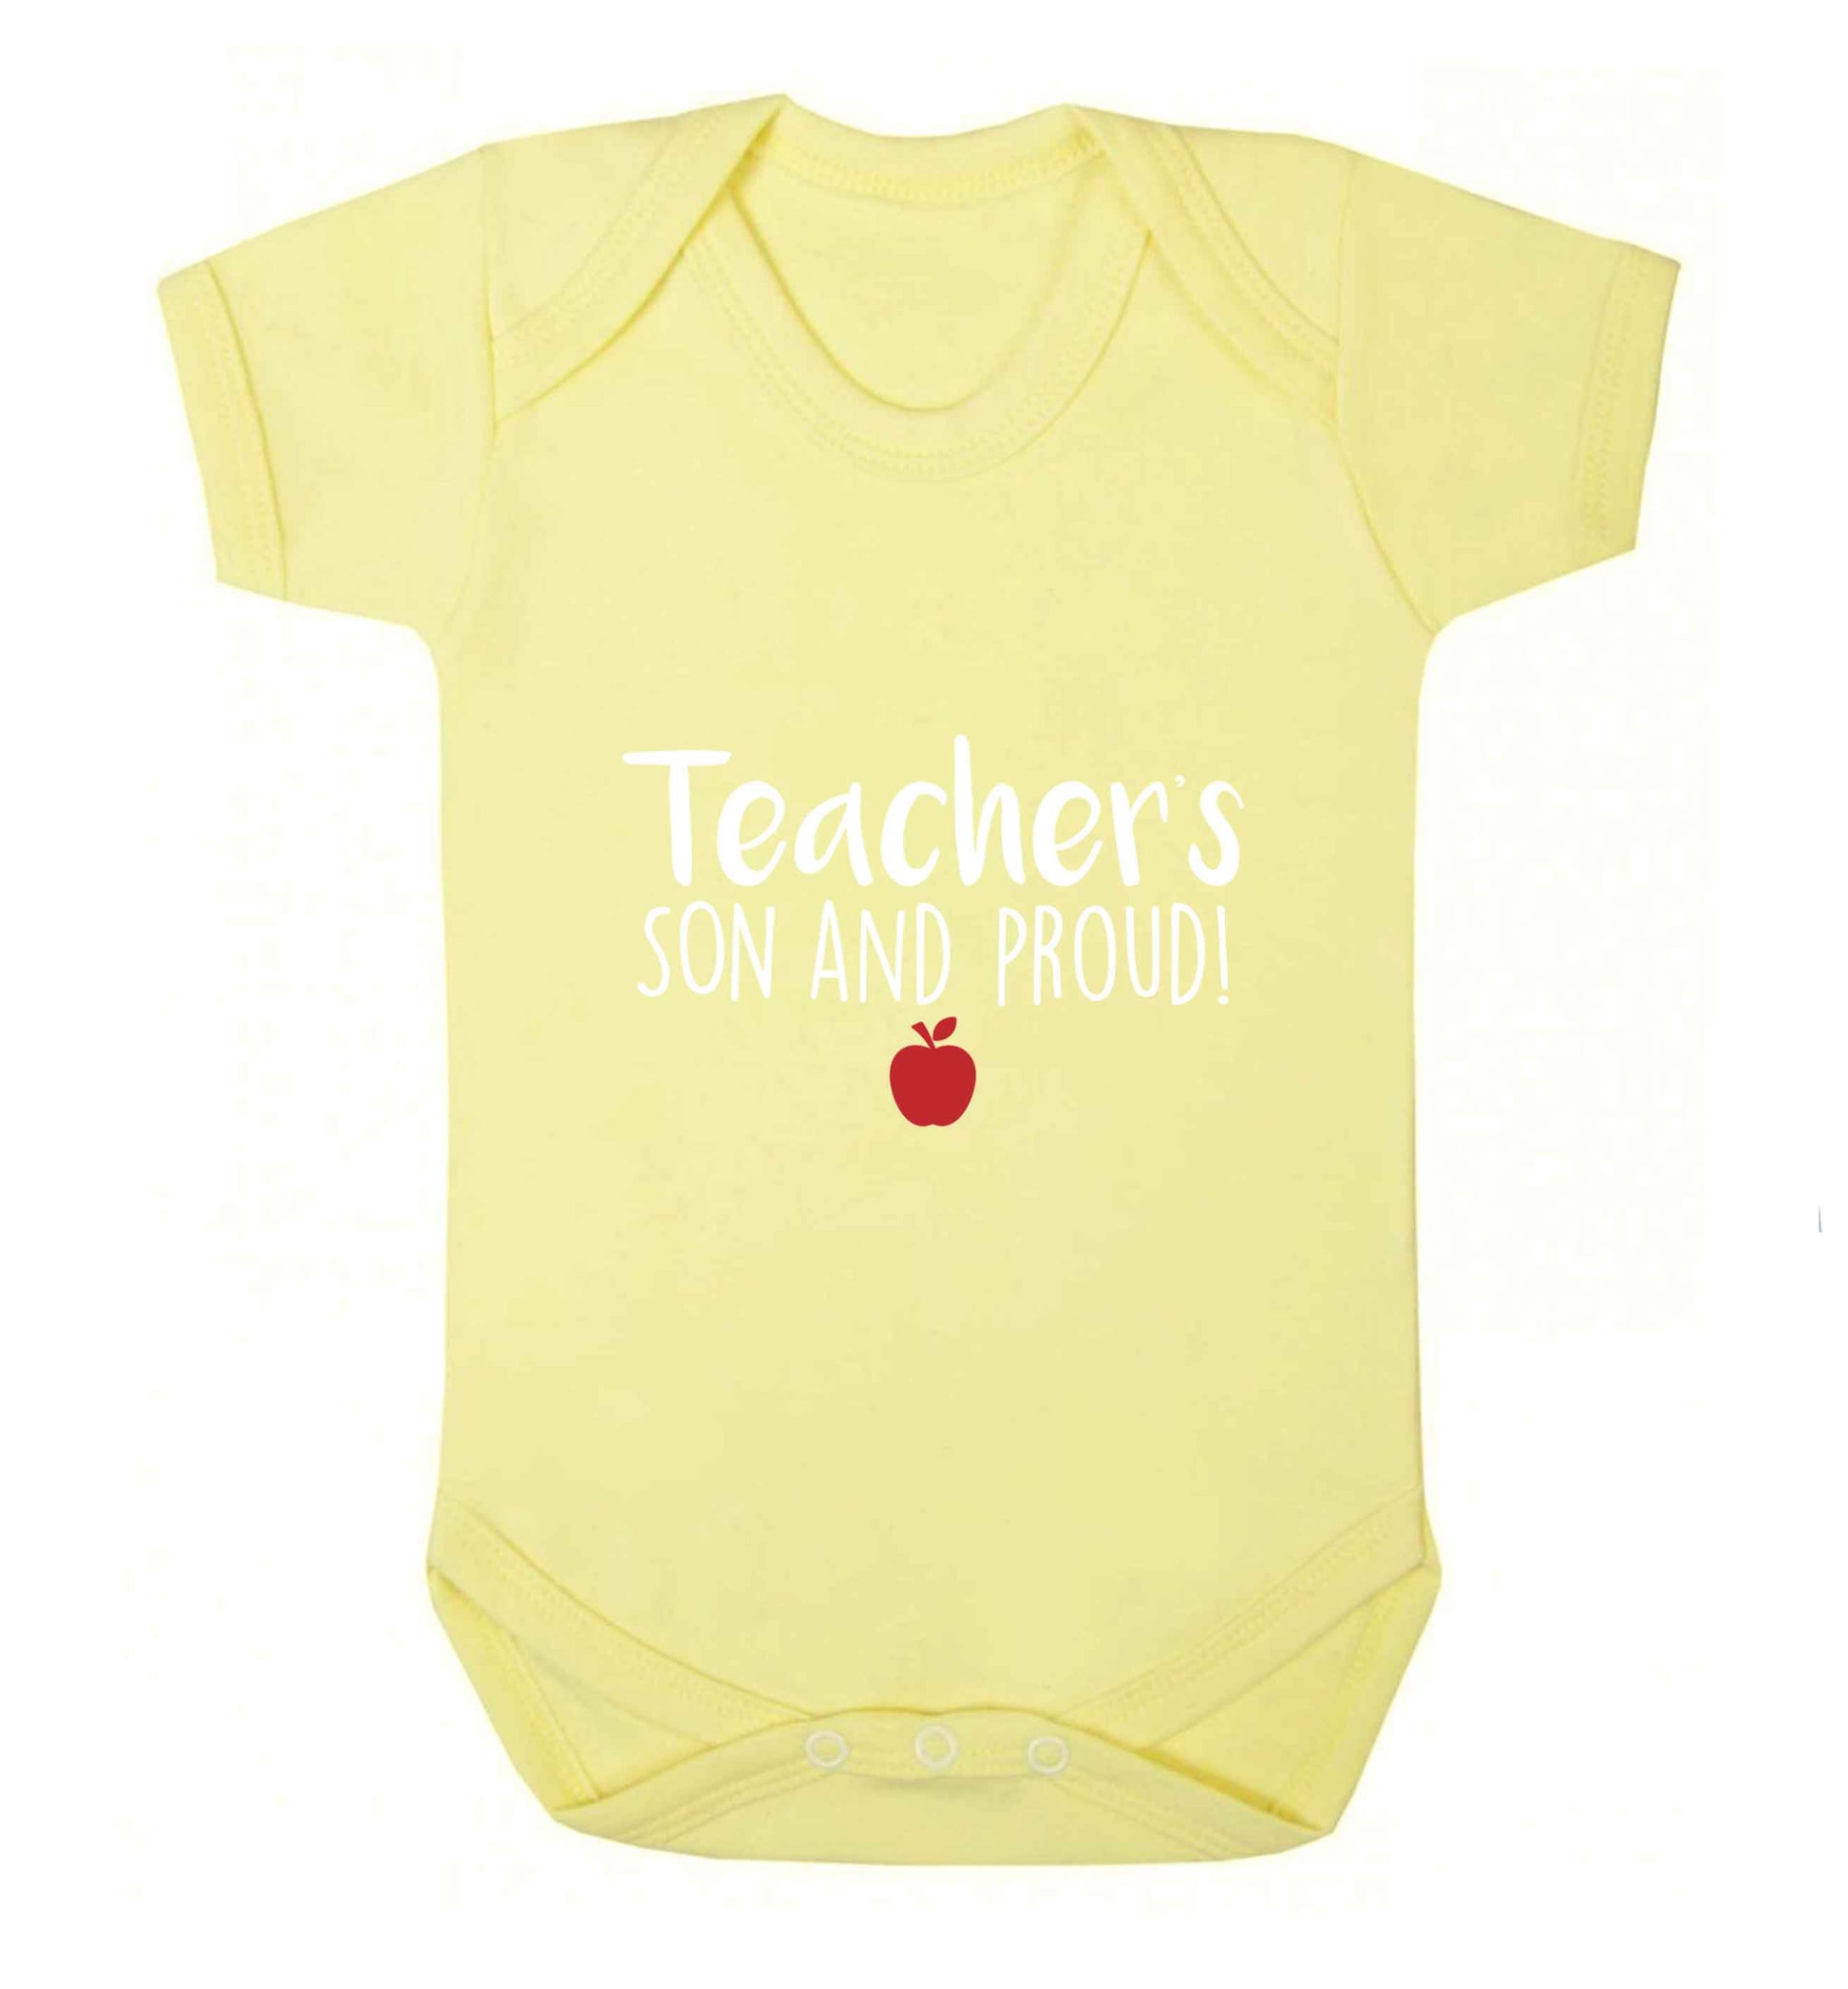 Teachers son and proud baby vest pale yellow 18-24 months